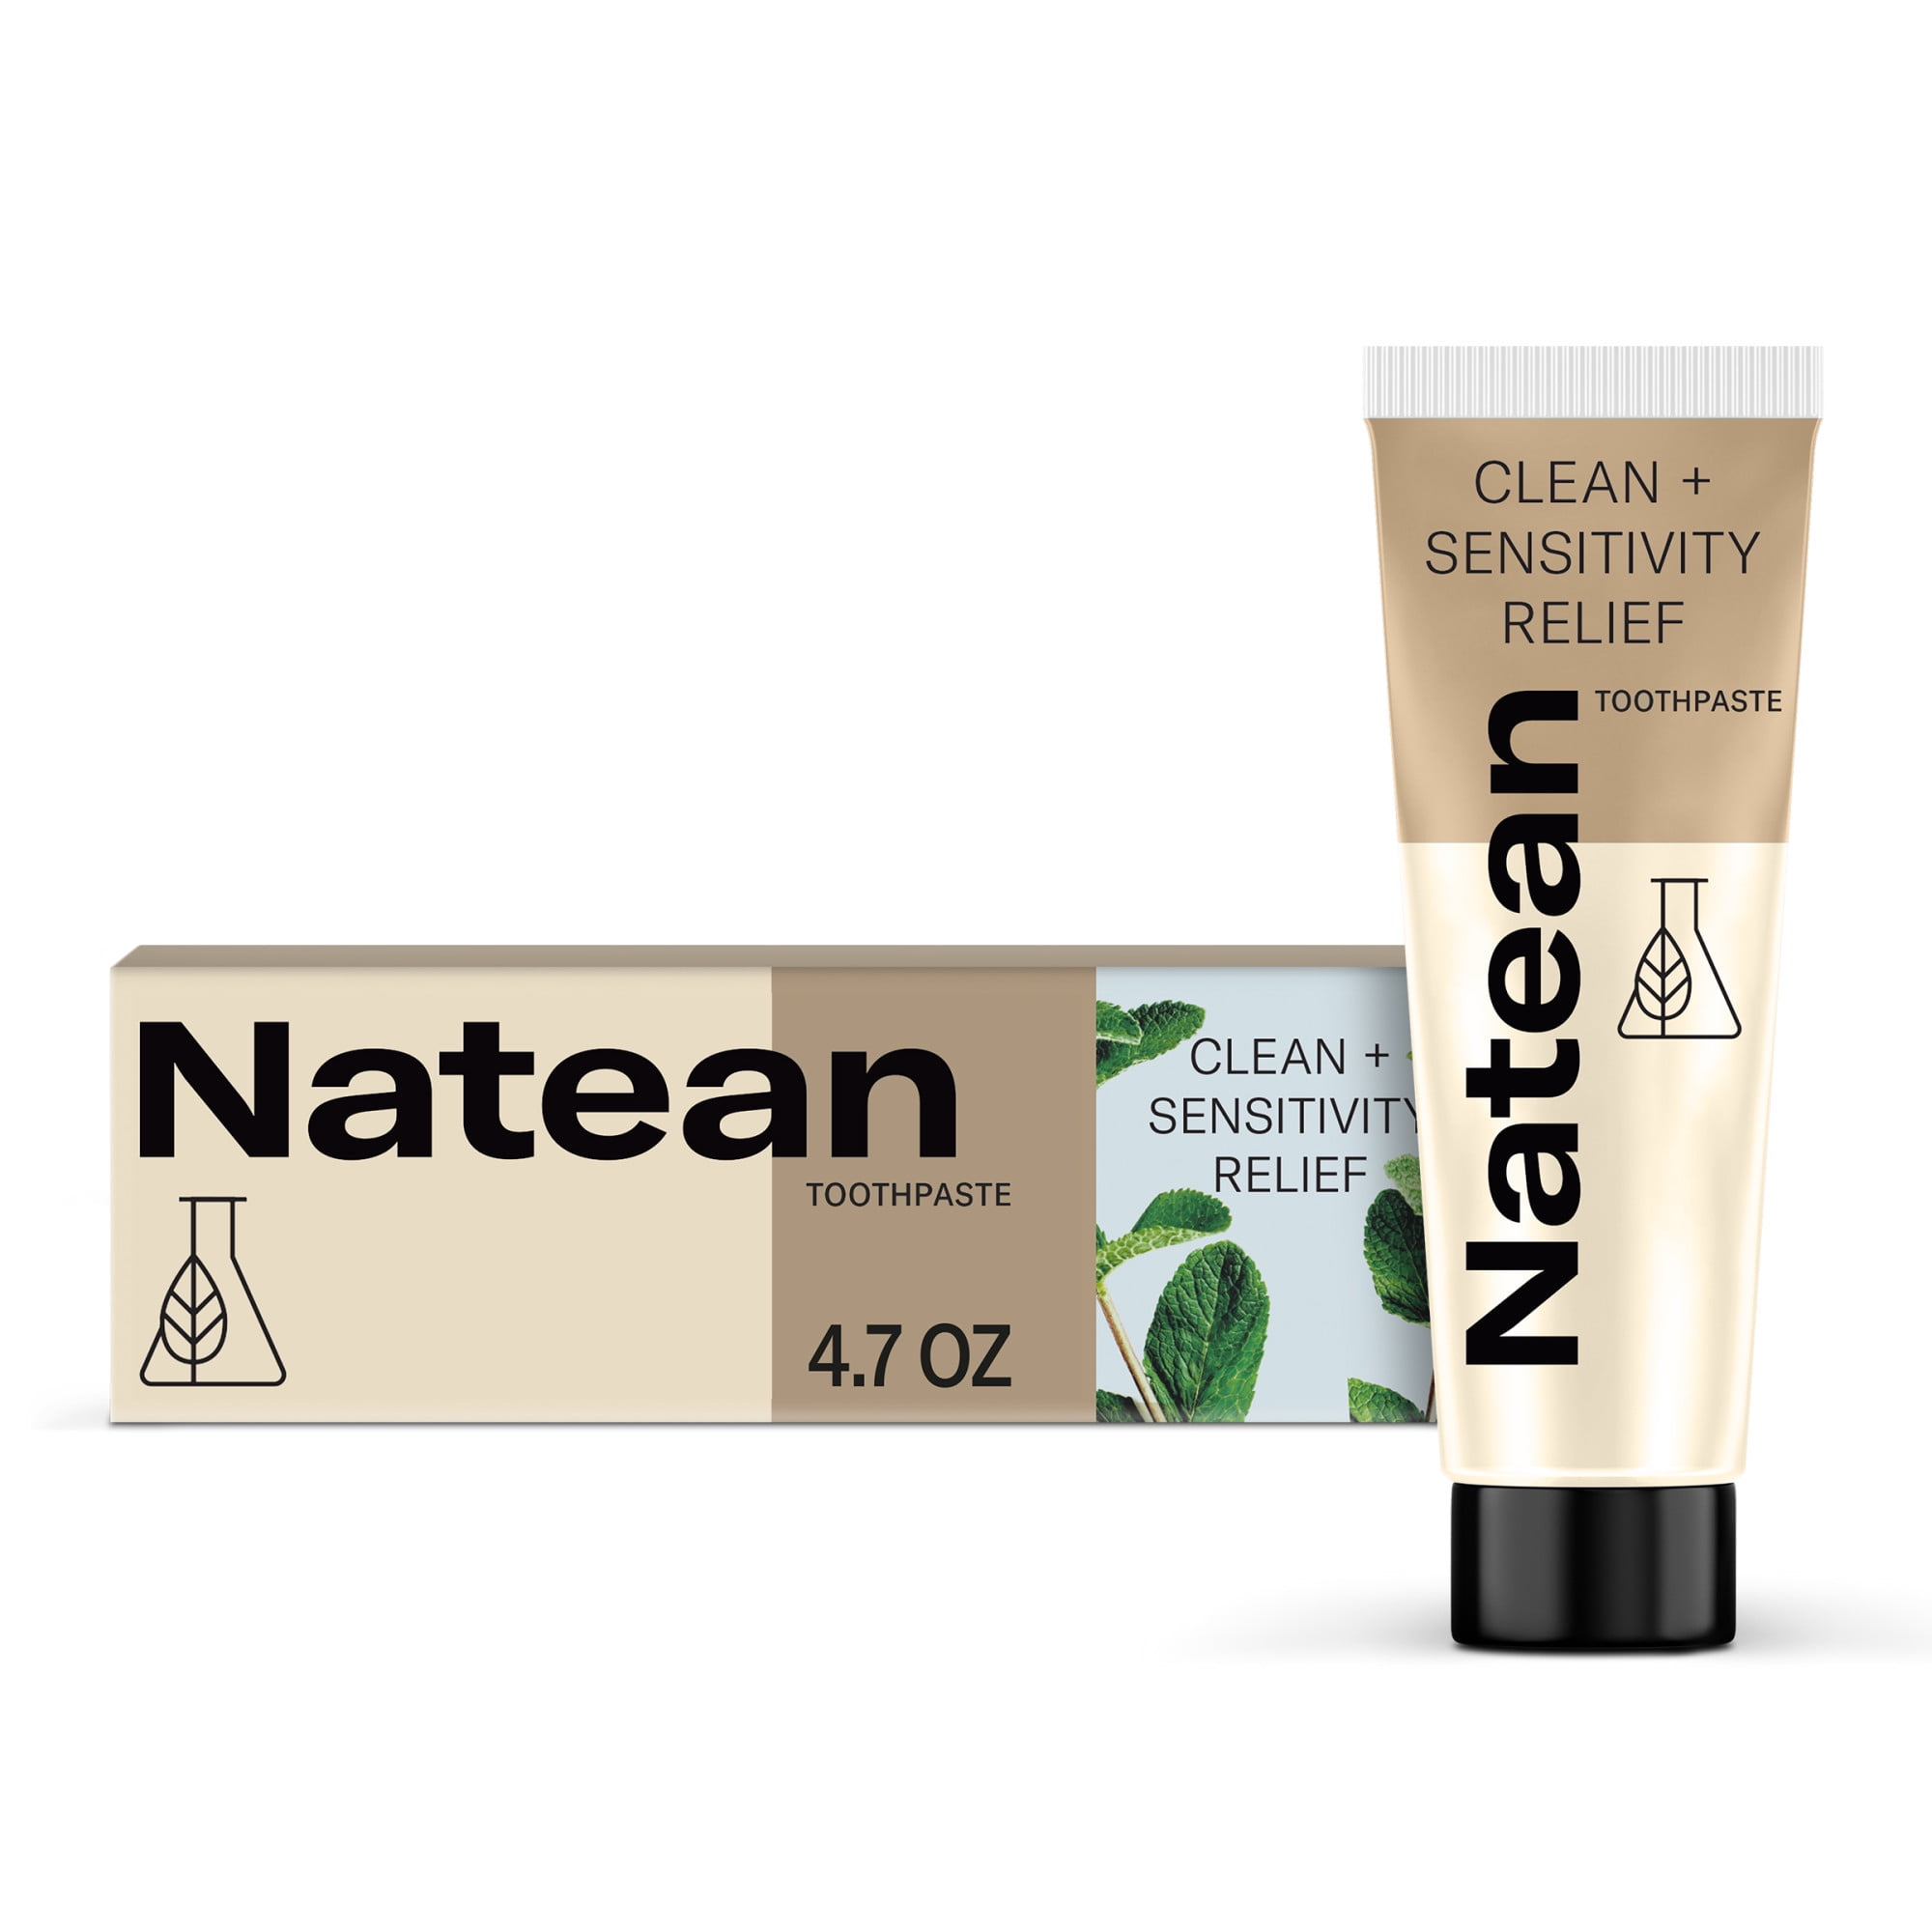 Natean Clean + Sensitivity Relief Toothpaste for Sensitive Teeth and Cavity Prevention, Soothing Mint - 4.7 Oz Tube - image 1 of 8